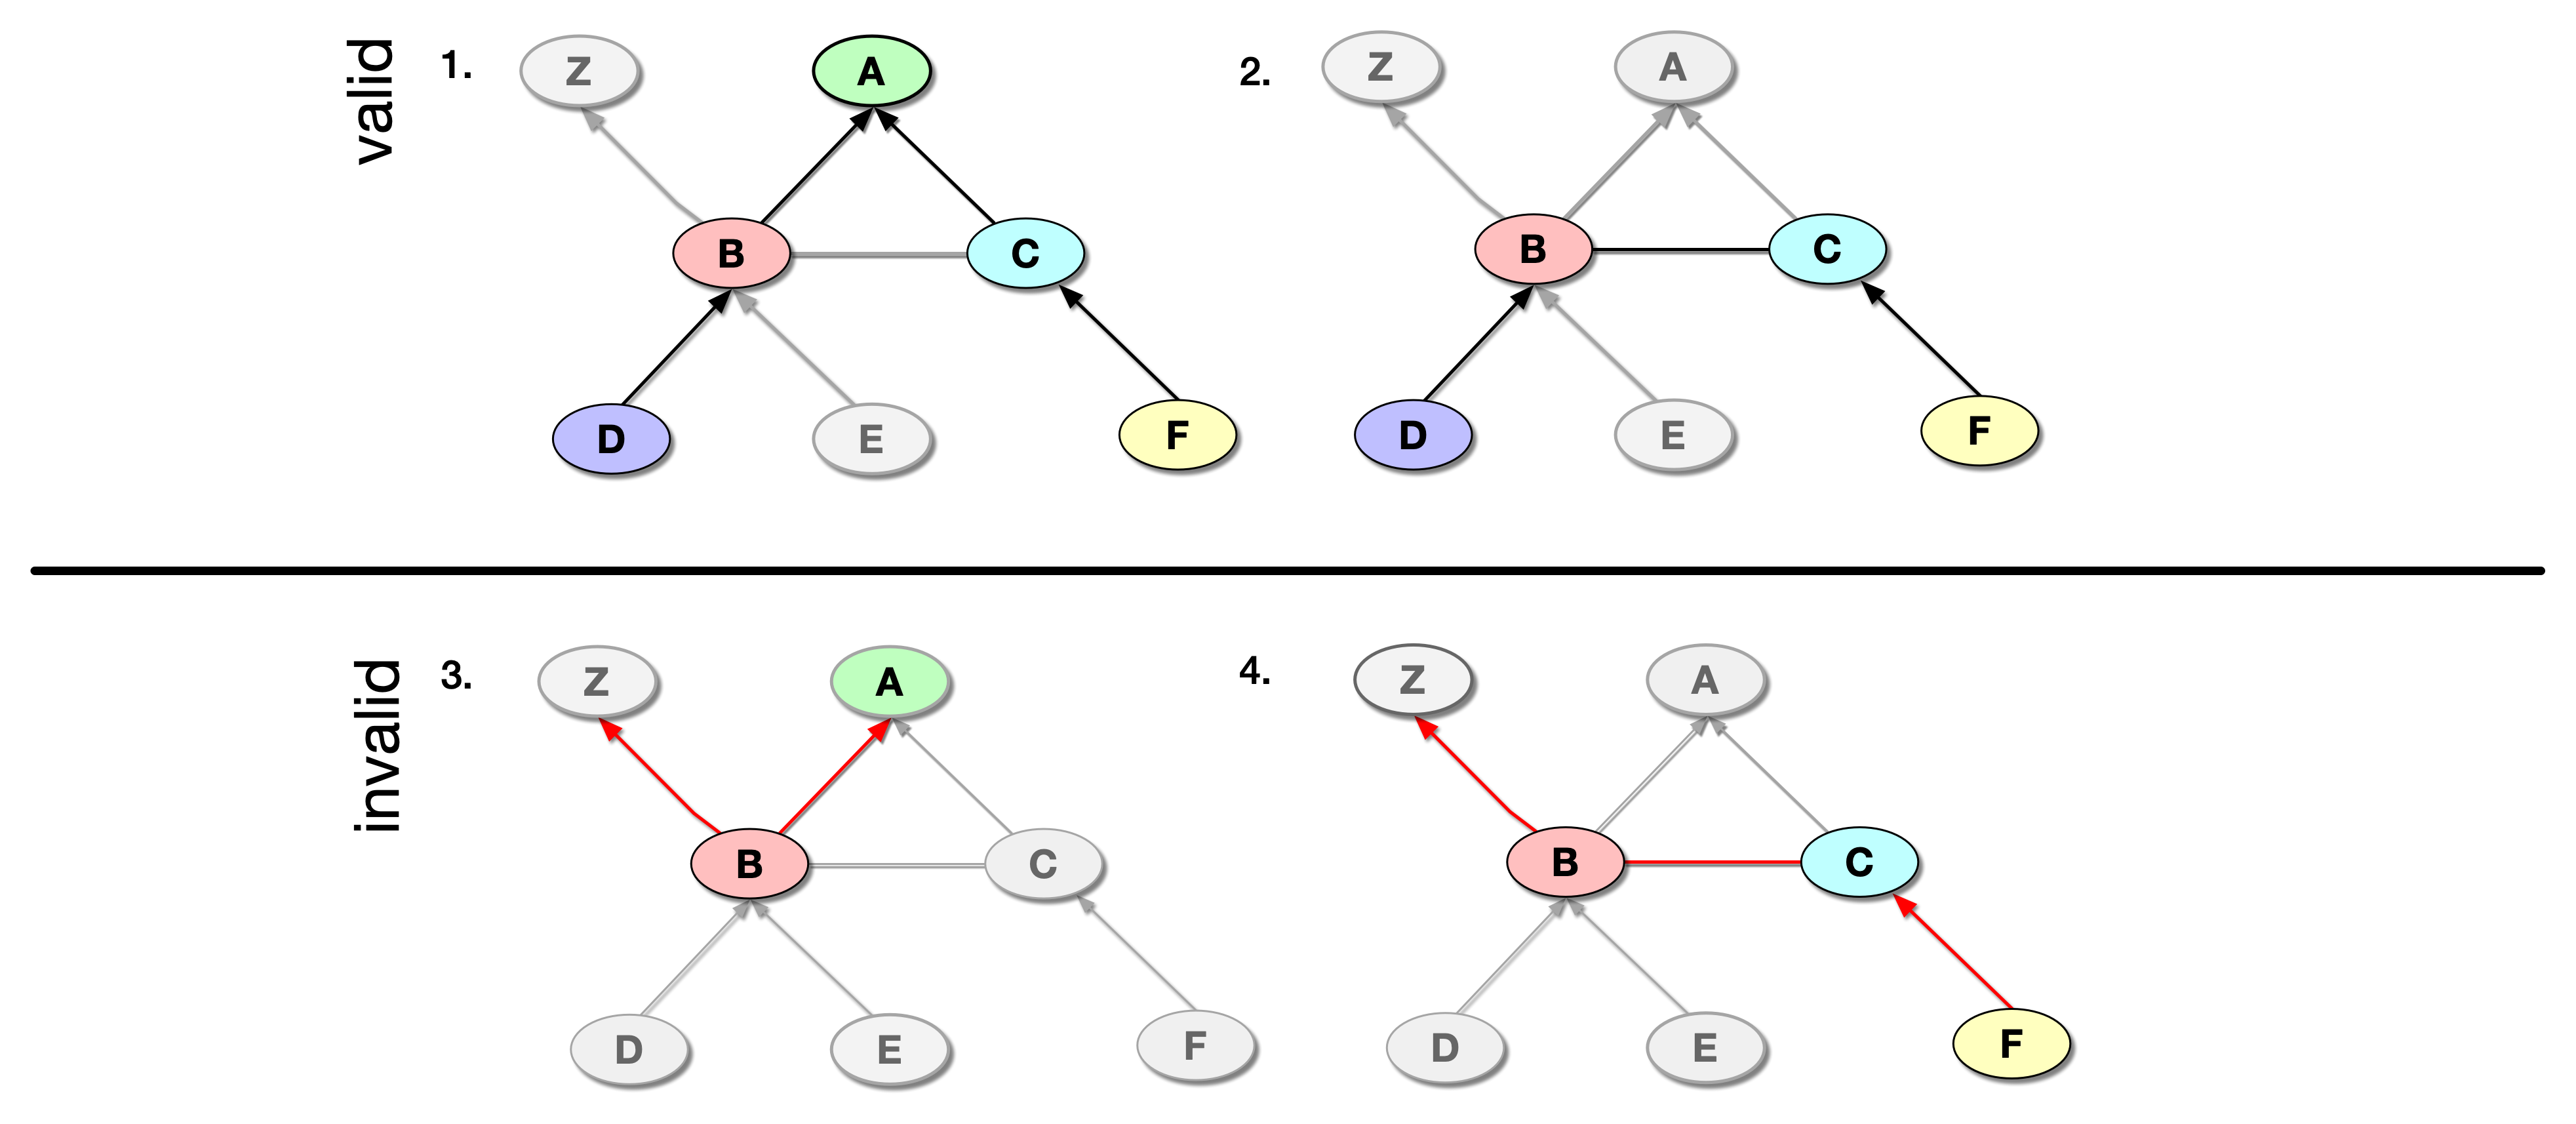 Examples of paths through a graph of ASes.